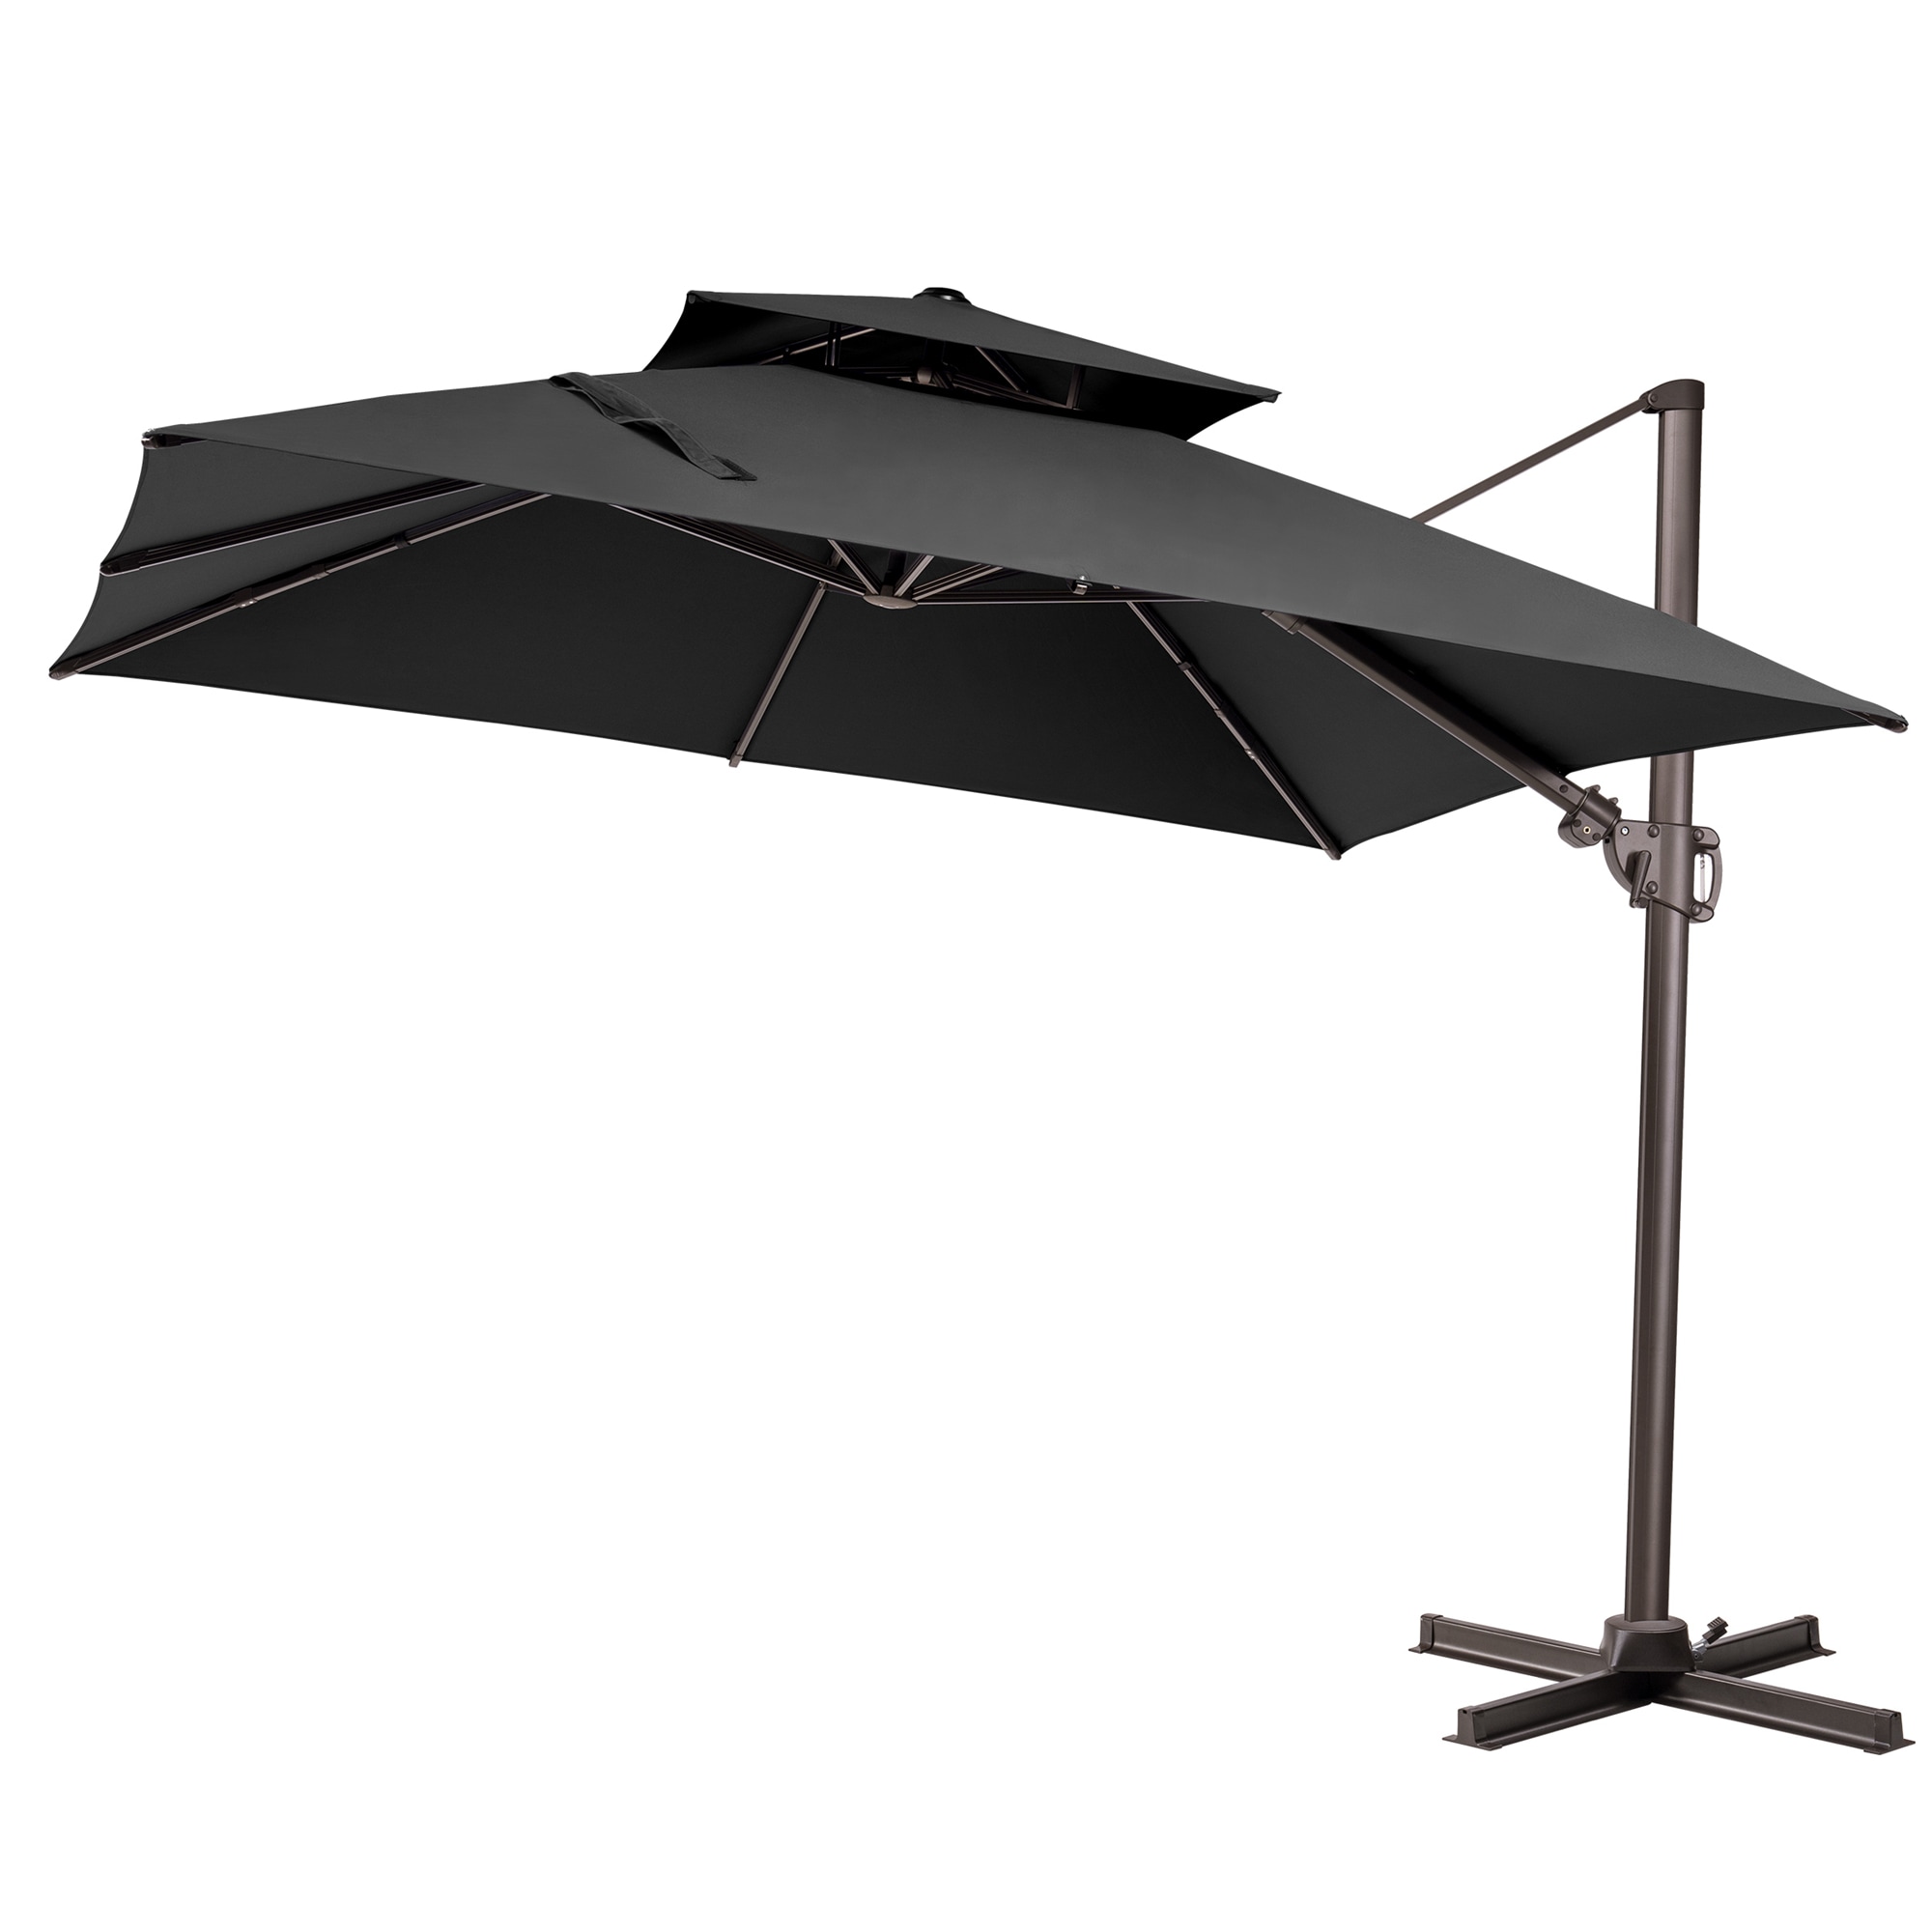 incompleet Arbeid Gedachte Crestlive Products 10-ft Dark Gray Slide-tilt Cantilever Patio Umbrella in  the Patio Umbrellas department at Lowes.com